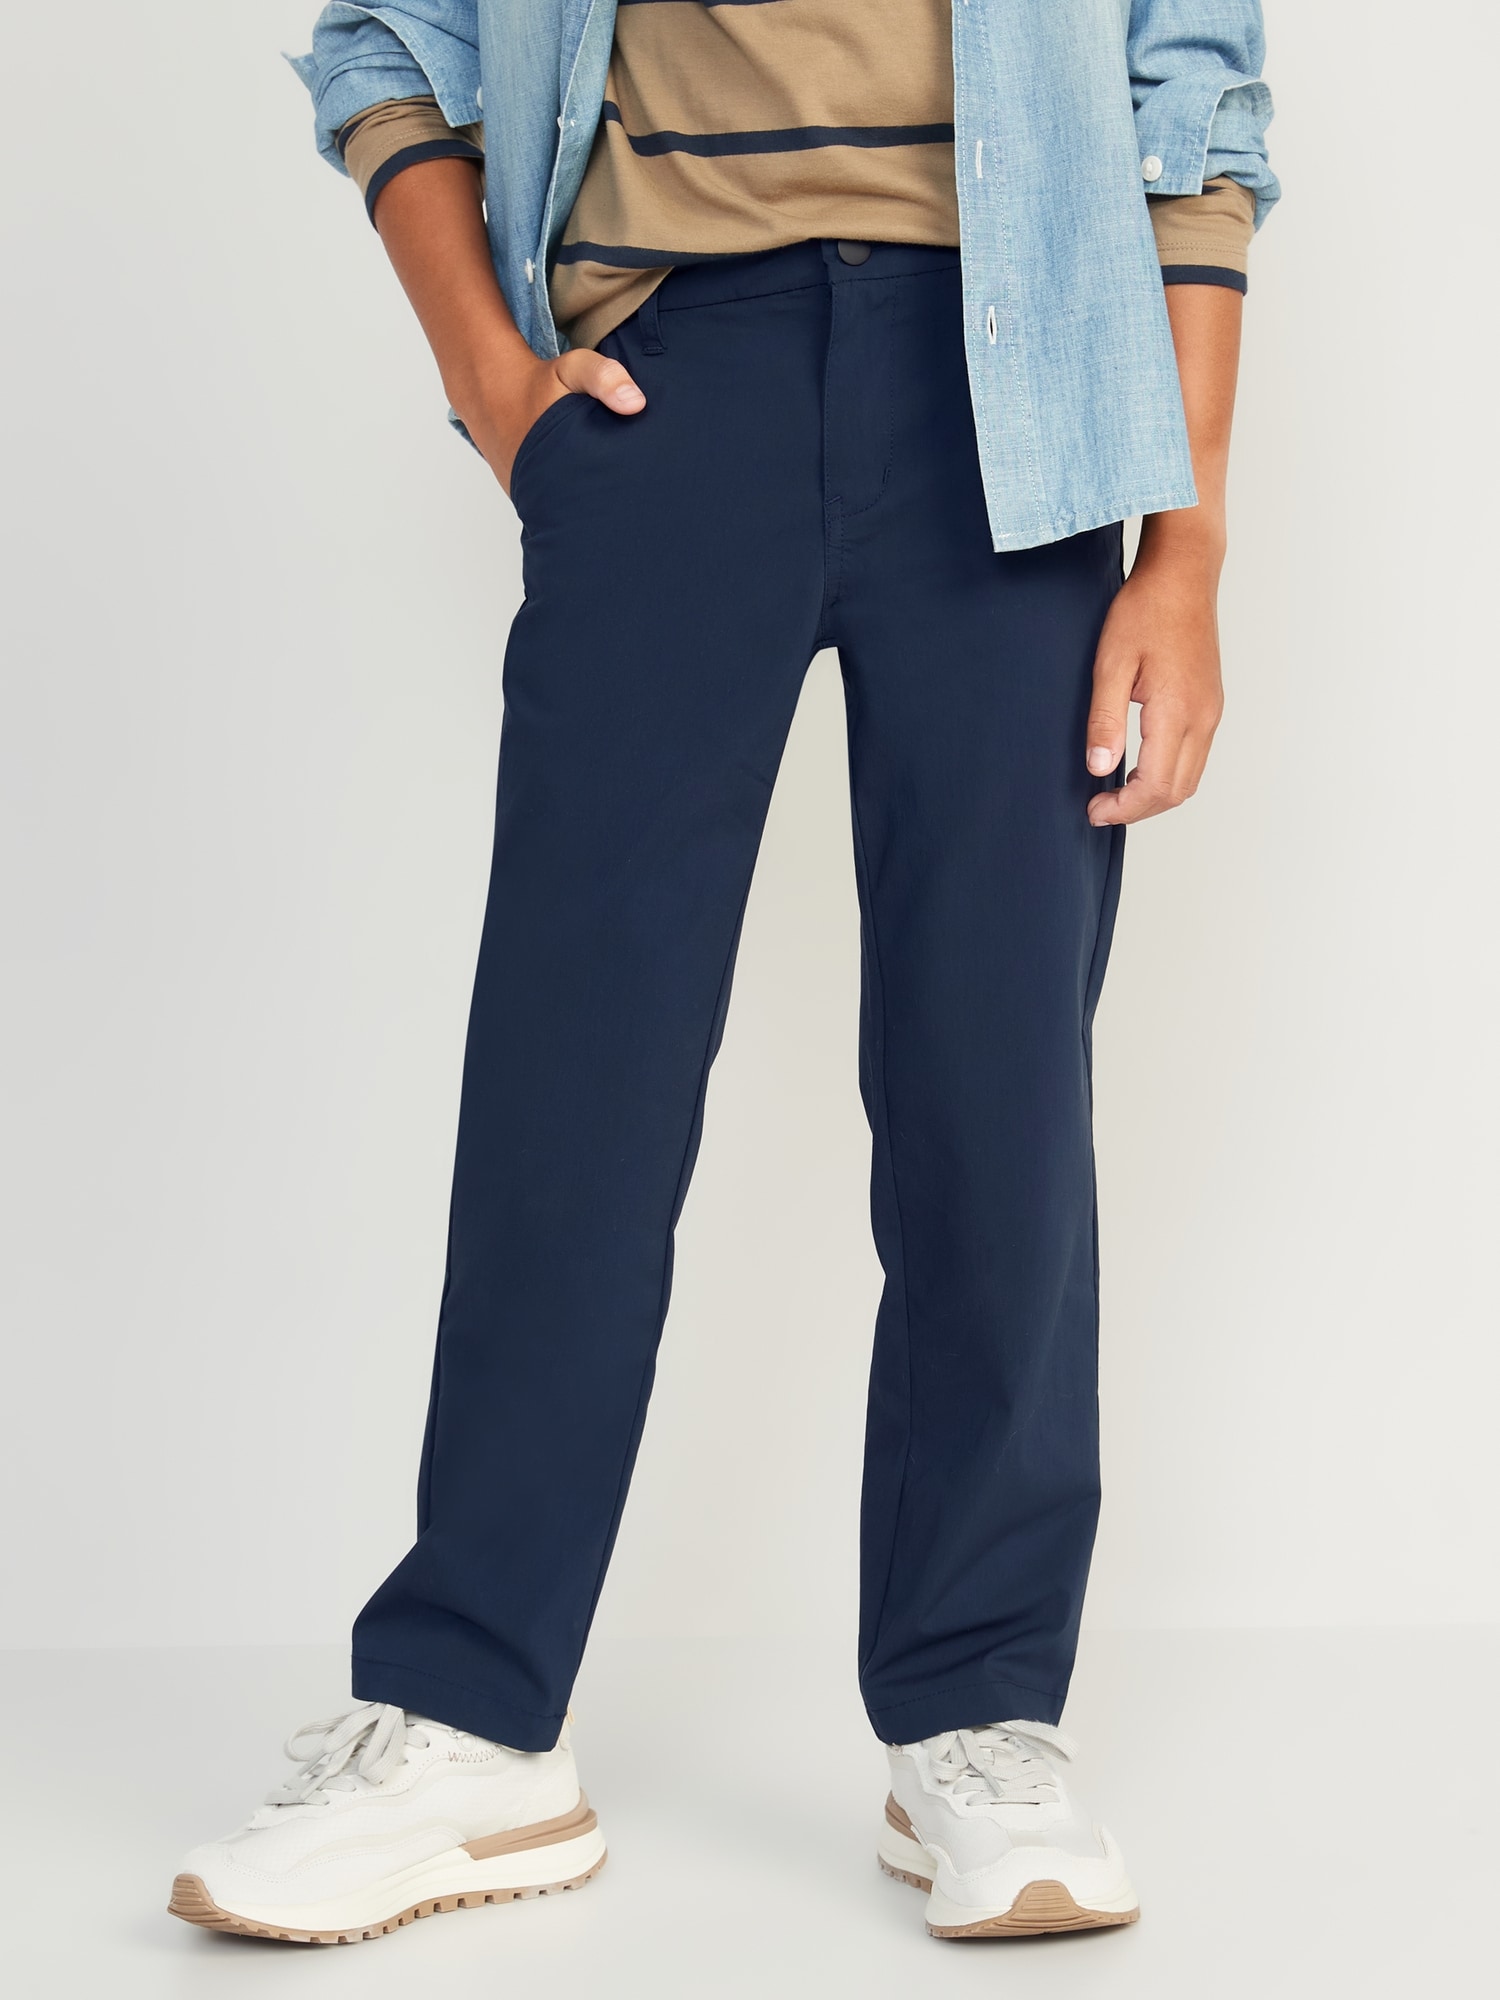 Old Navy Slim Built-In Flex Chino School Uniform Pants for Boys |  Southcentre Mall